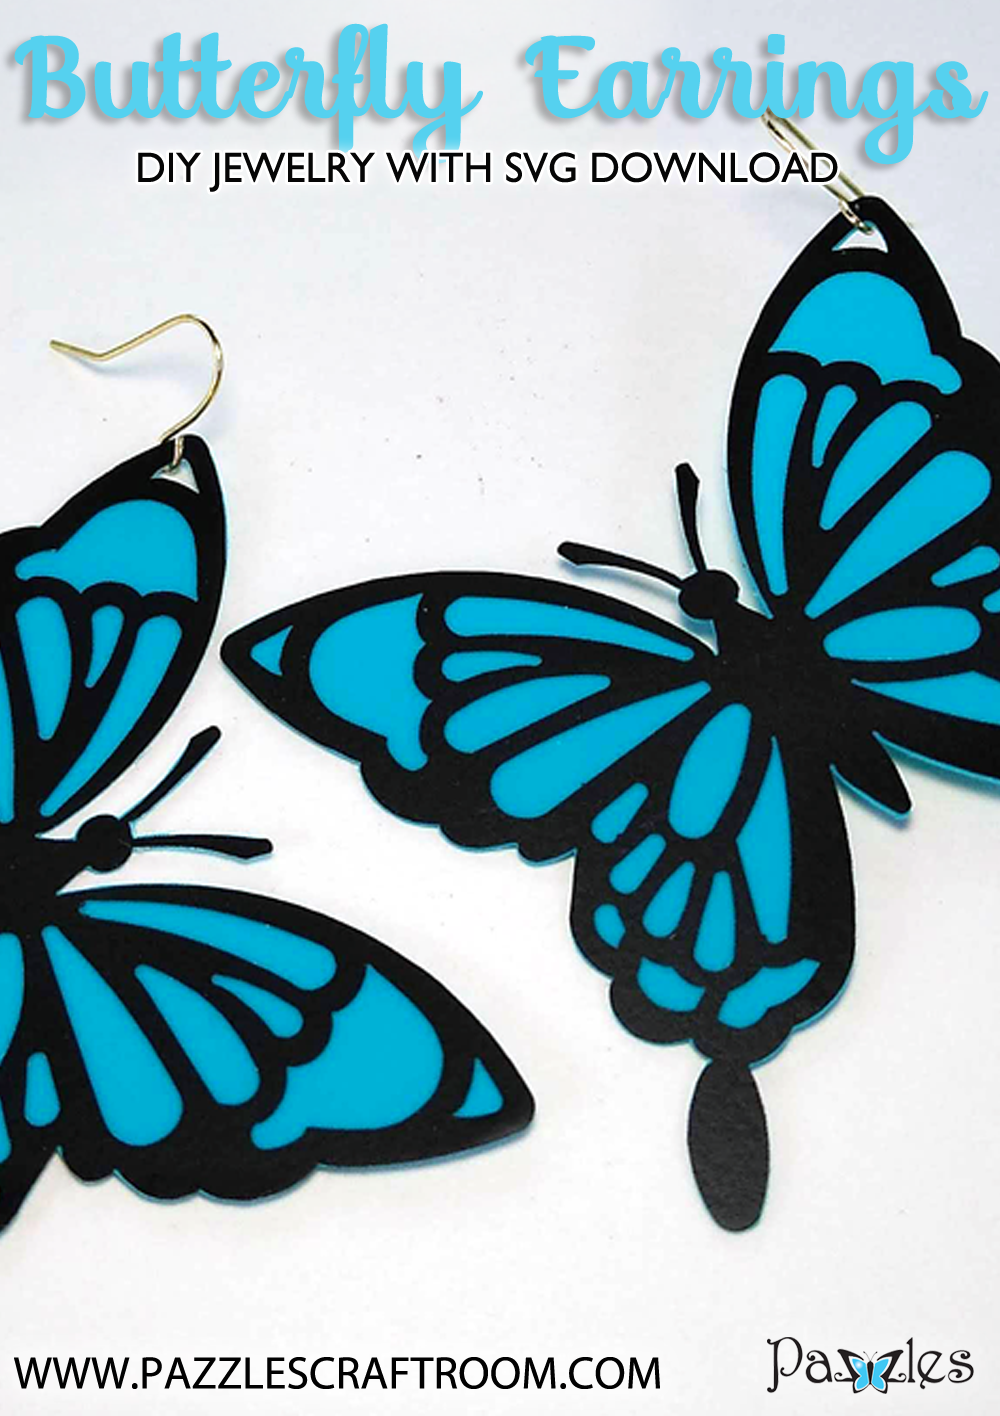 DIY Butterfly Earrings with instant SVG download - Pazzles Craft Room